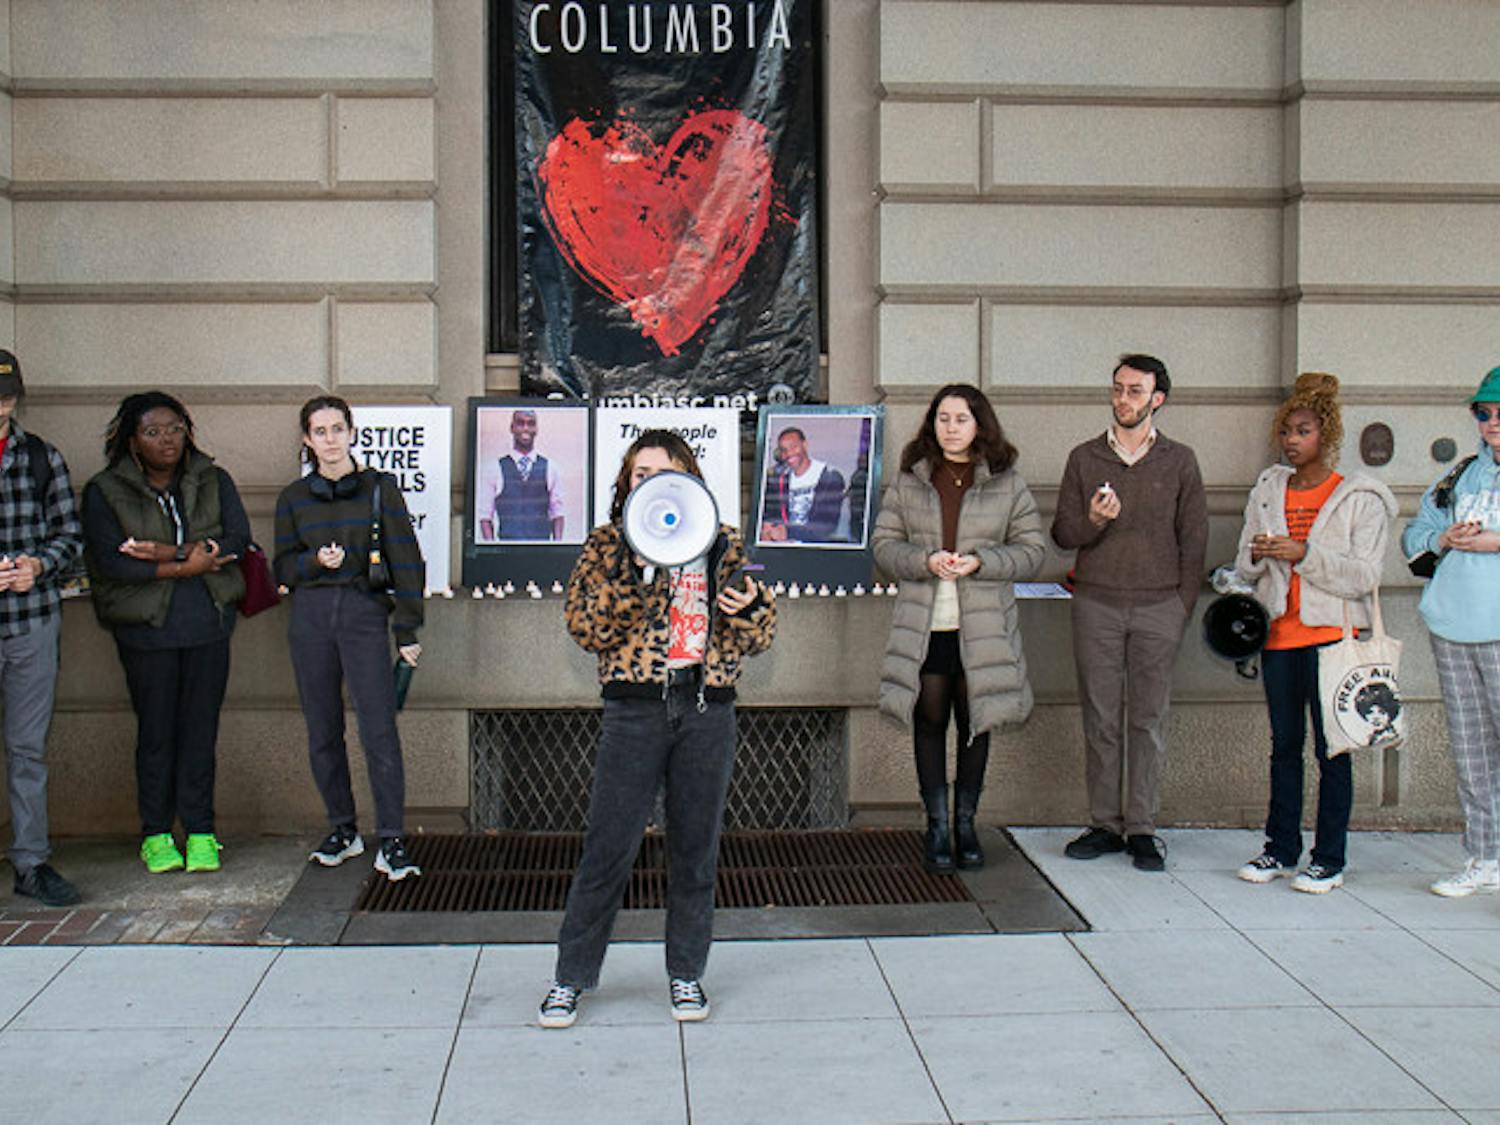 The South Carolina Party for Socialism and Liberation held a candlelight vigil for Tyre Nichols on Feb. 5, 2023. The event was the first event in Columbia, S.C. to honor Nichols death at the hands of five Memphis, Tennessee police officers on Jan. 10, 2023. Members of the community, USC students and activists were in attendance of the event. &nbsp;